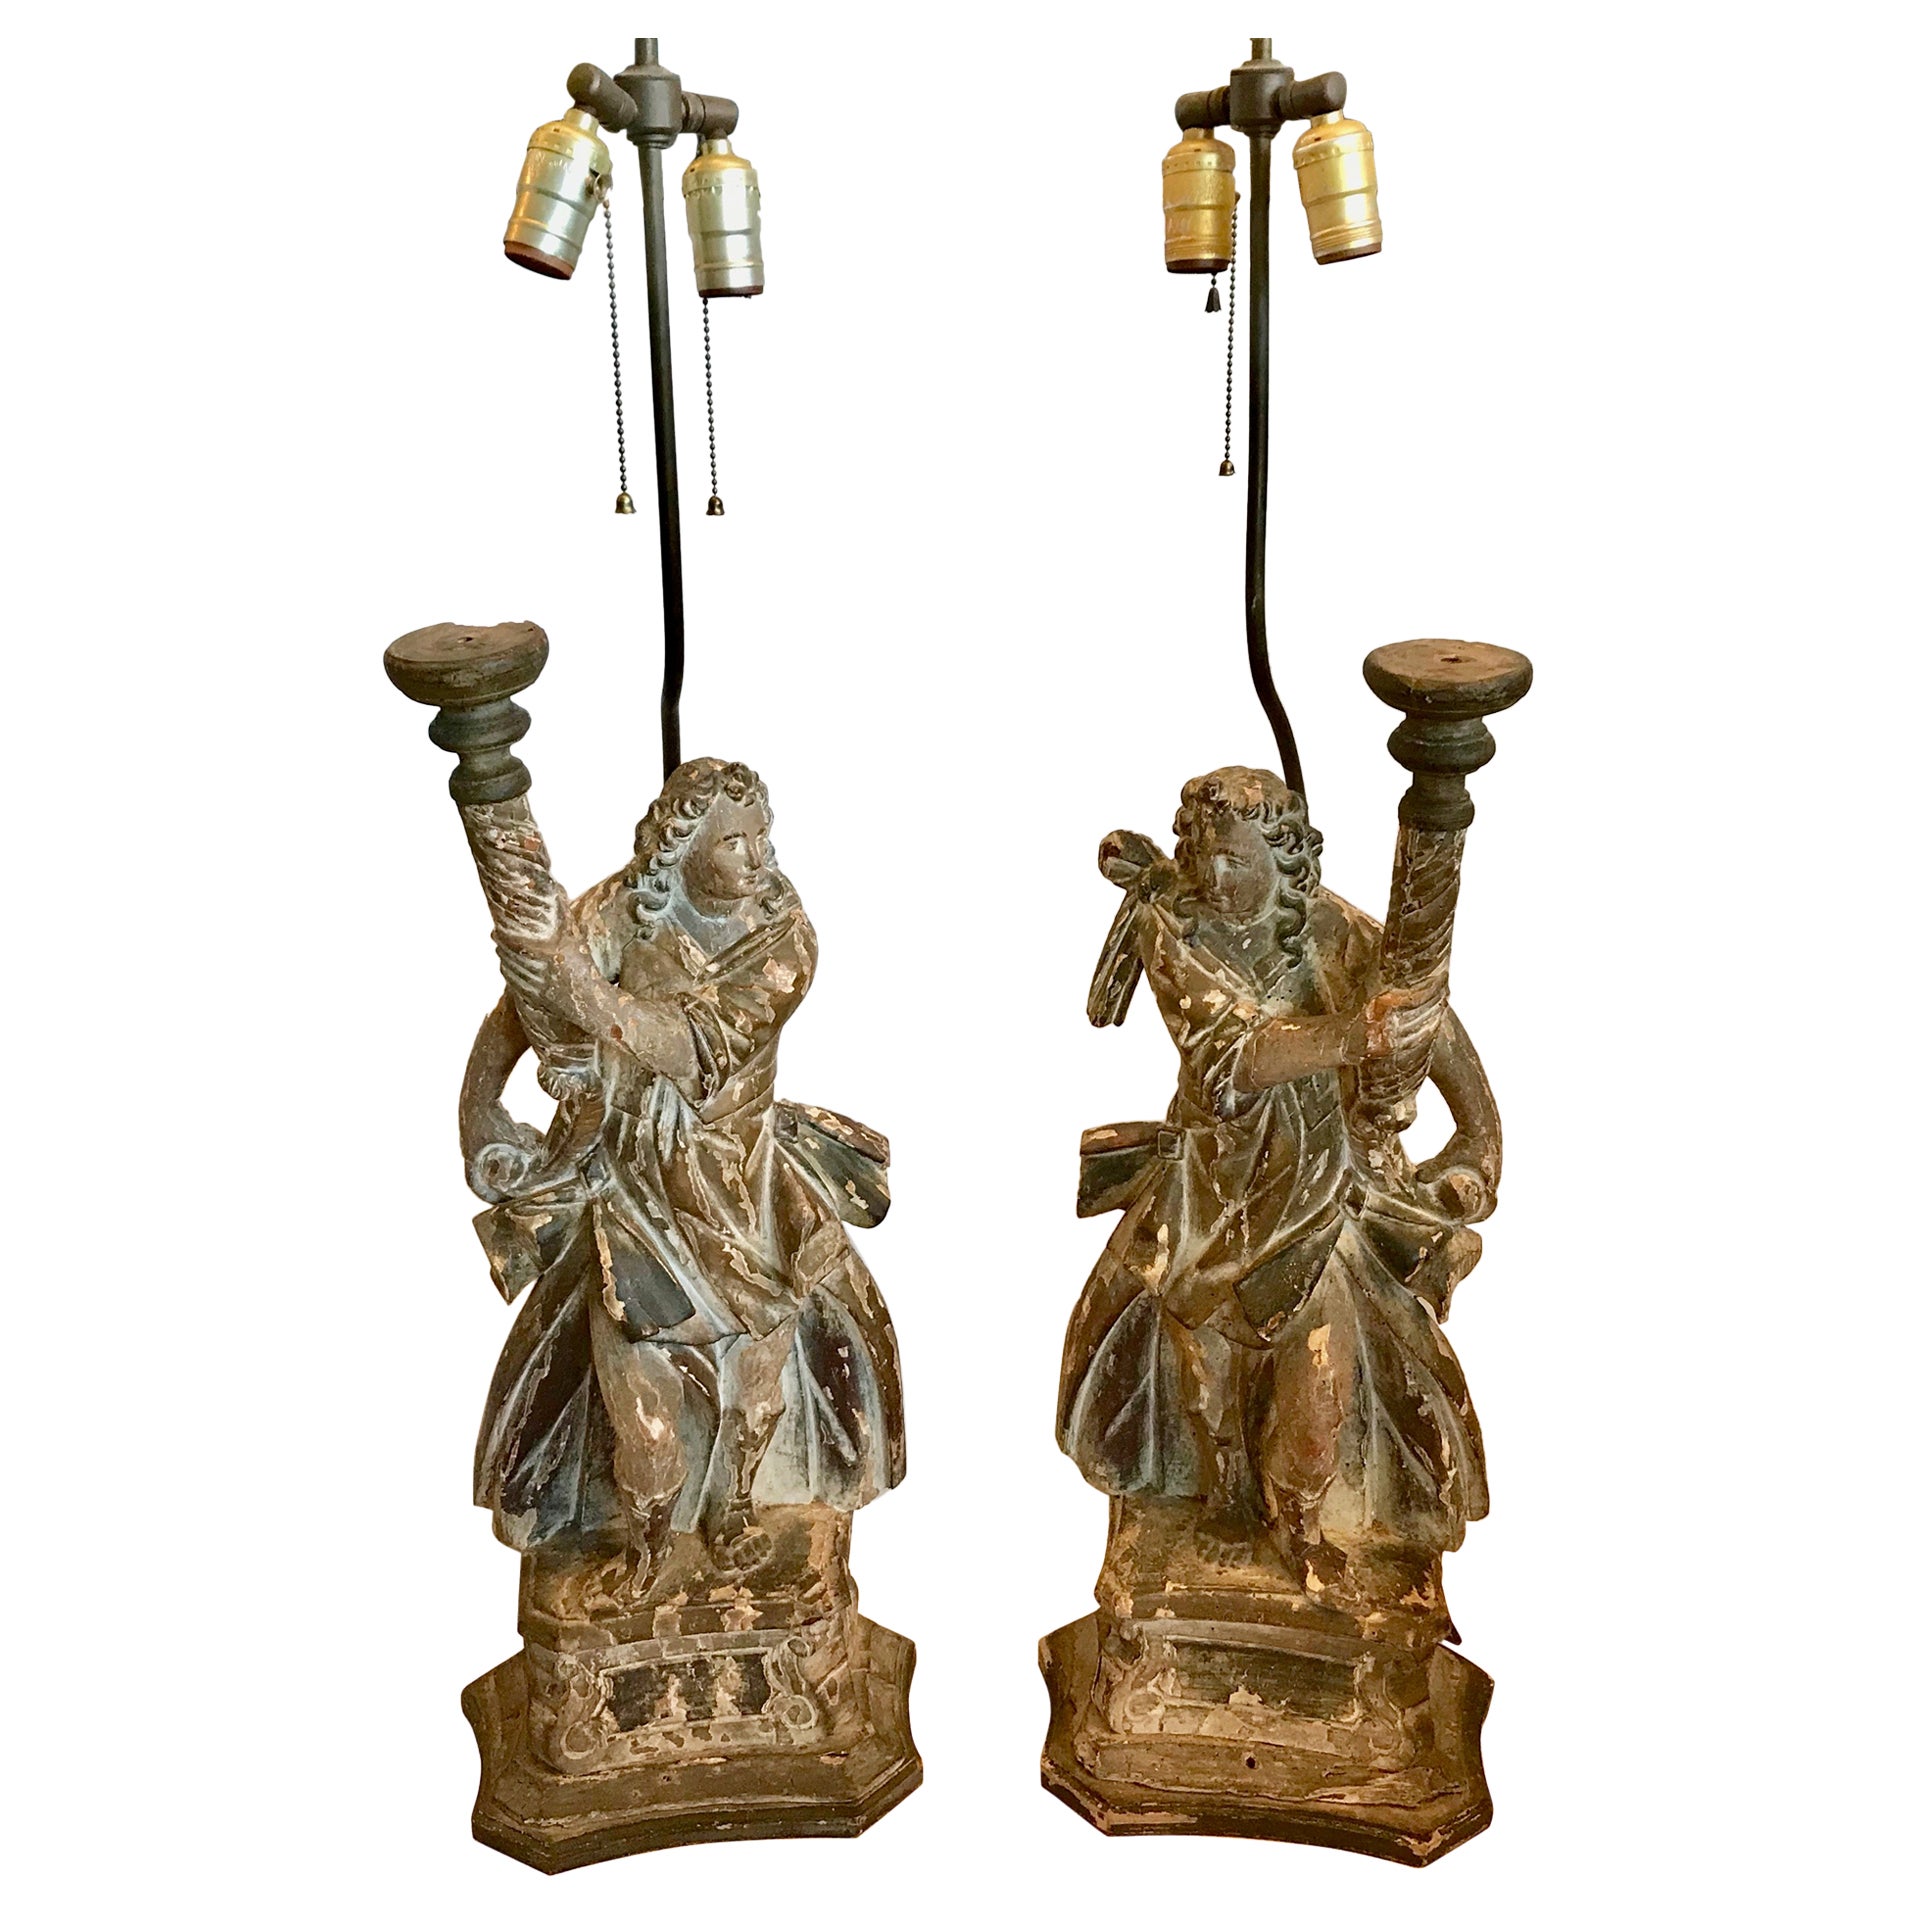 Pair Of 17TH Century Italian Figural Prickets Now Mounted As Lamps For Sale